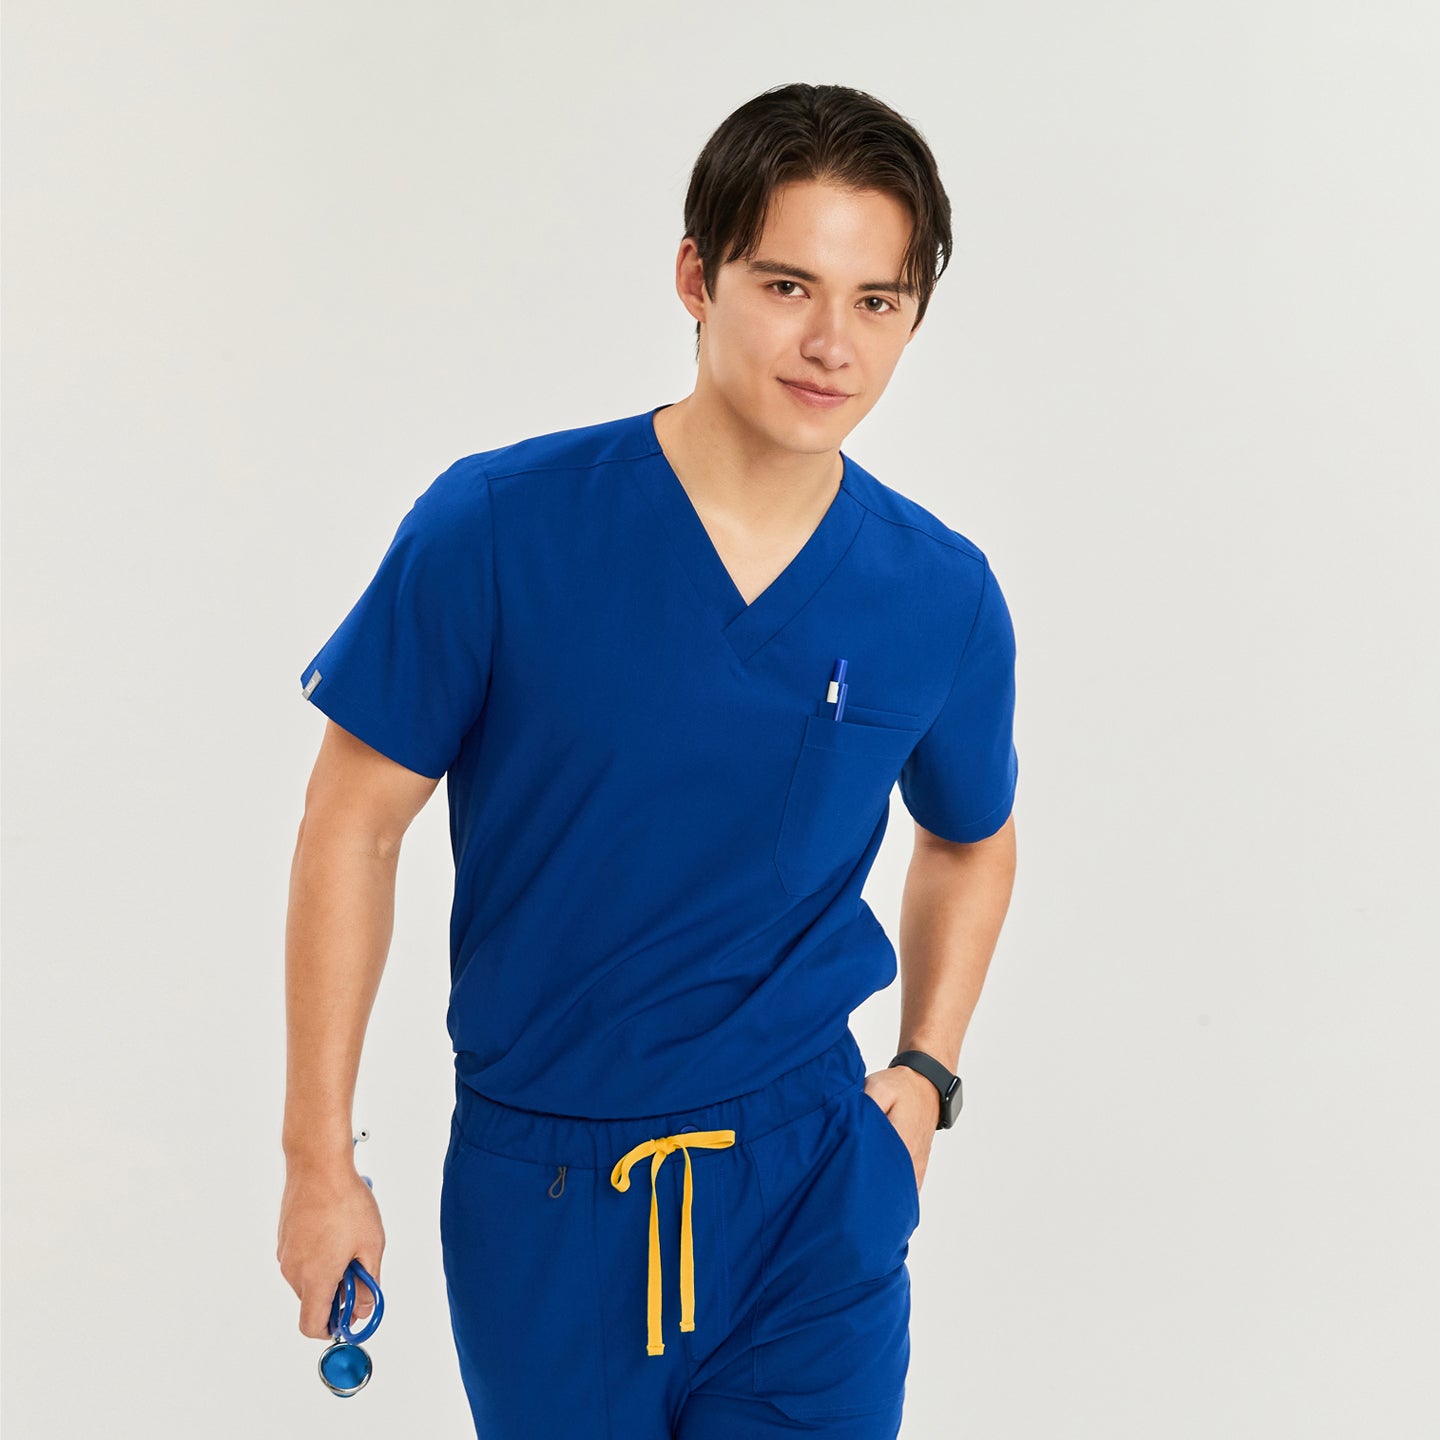 Male model wearing a scrub top with a chest pocket and drawstring pants, holding a stethoscope, and smiling while looking at the camera, Royal Blue